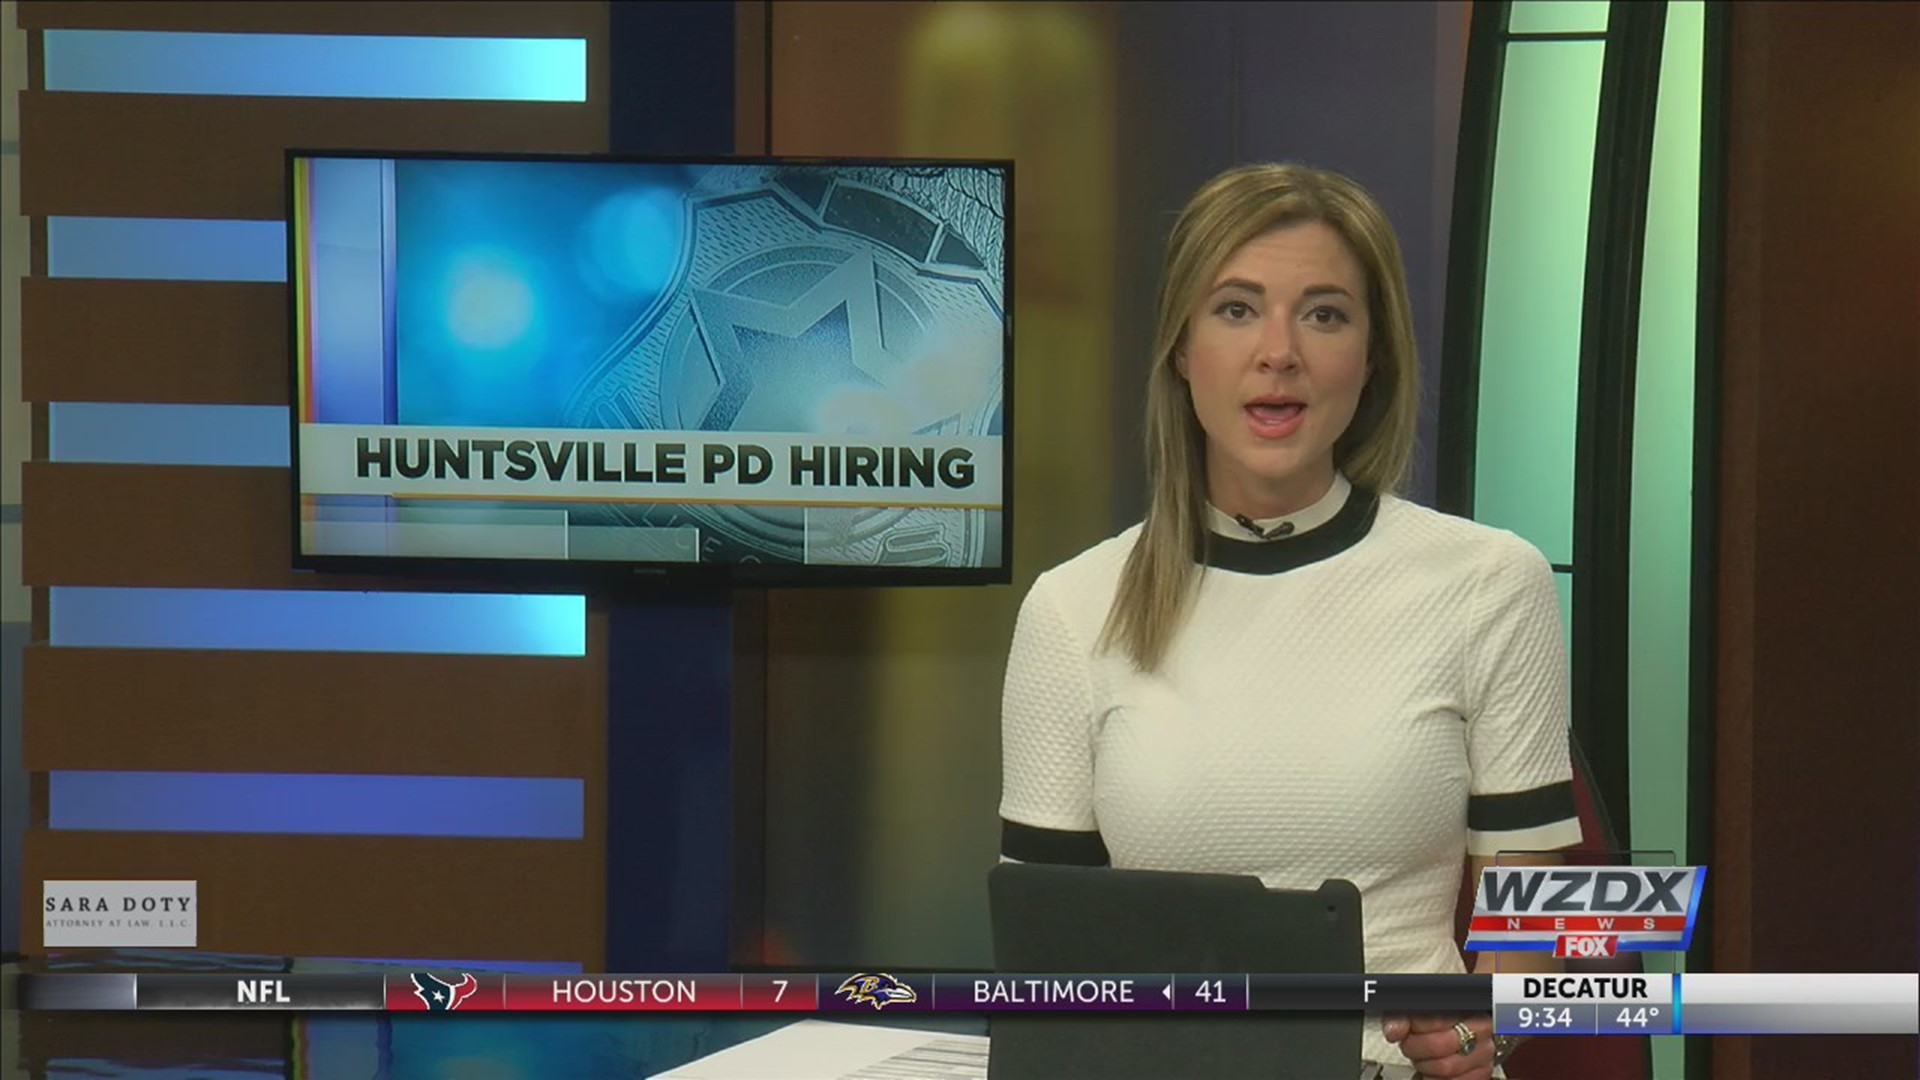 The Huntsville Police Department is currently accepting applications for police officers.